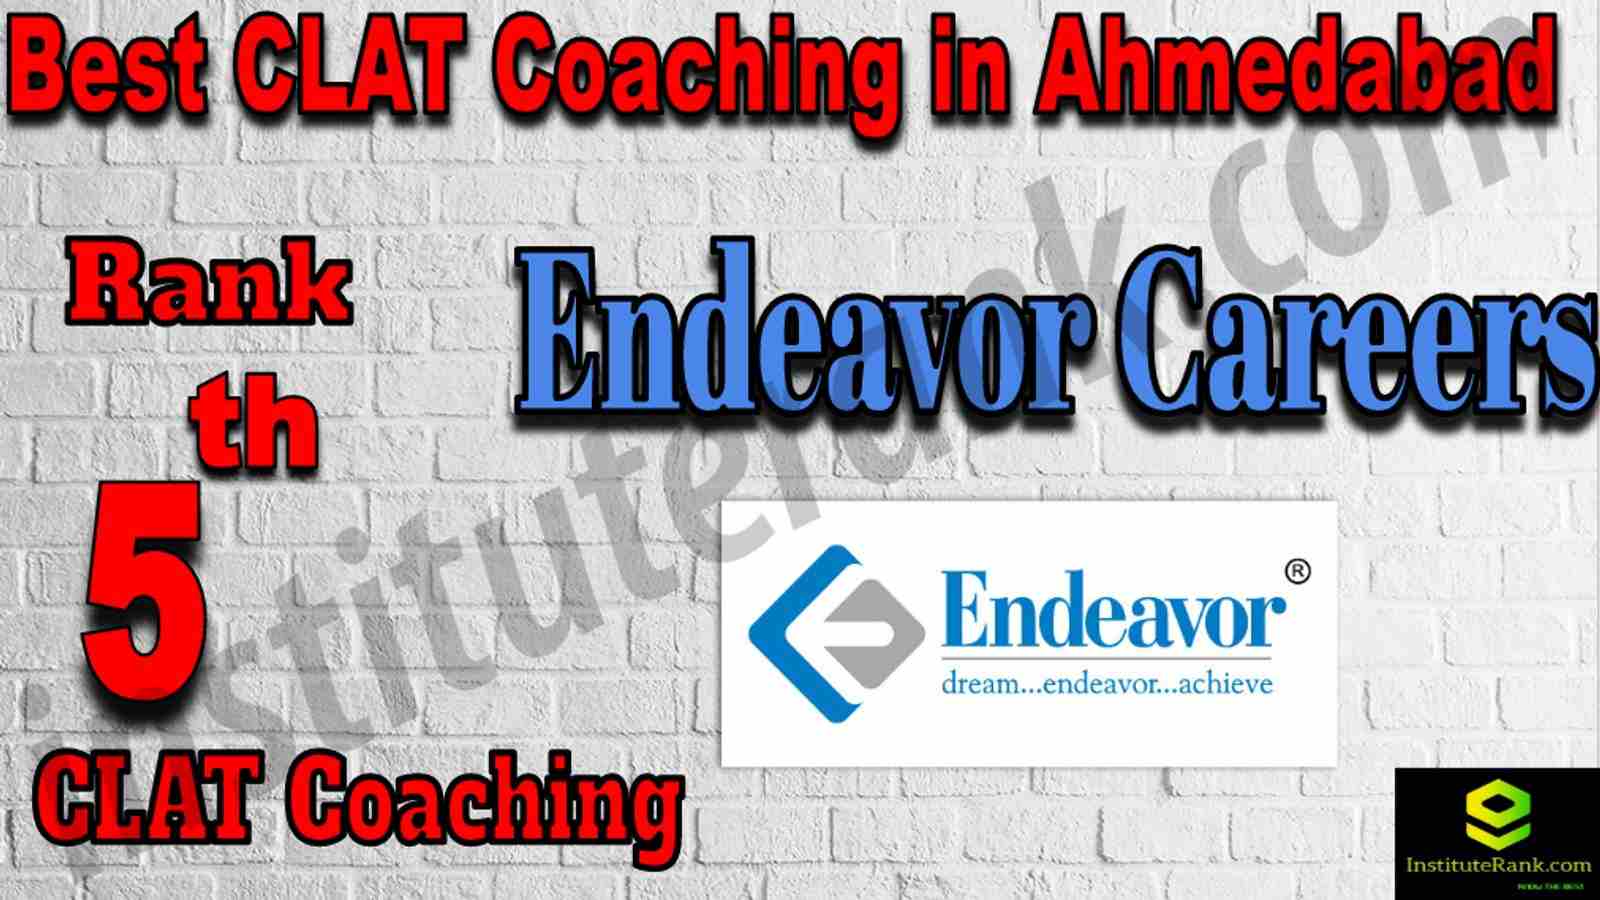 5th Best CLAT Coaching in Ahmedabad